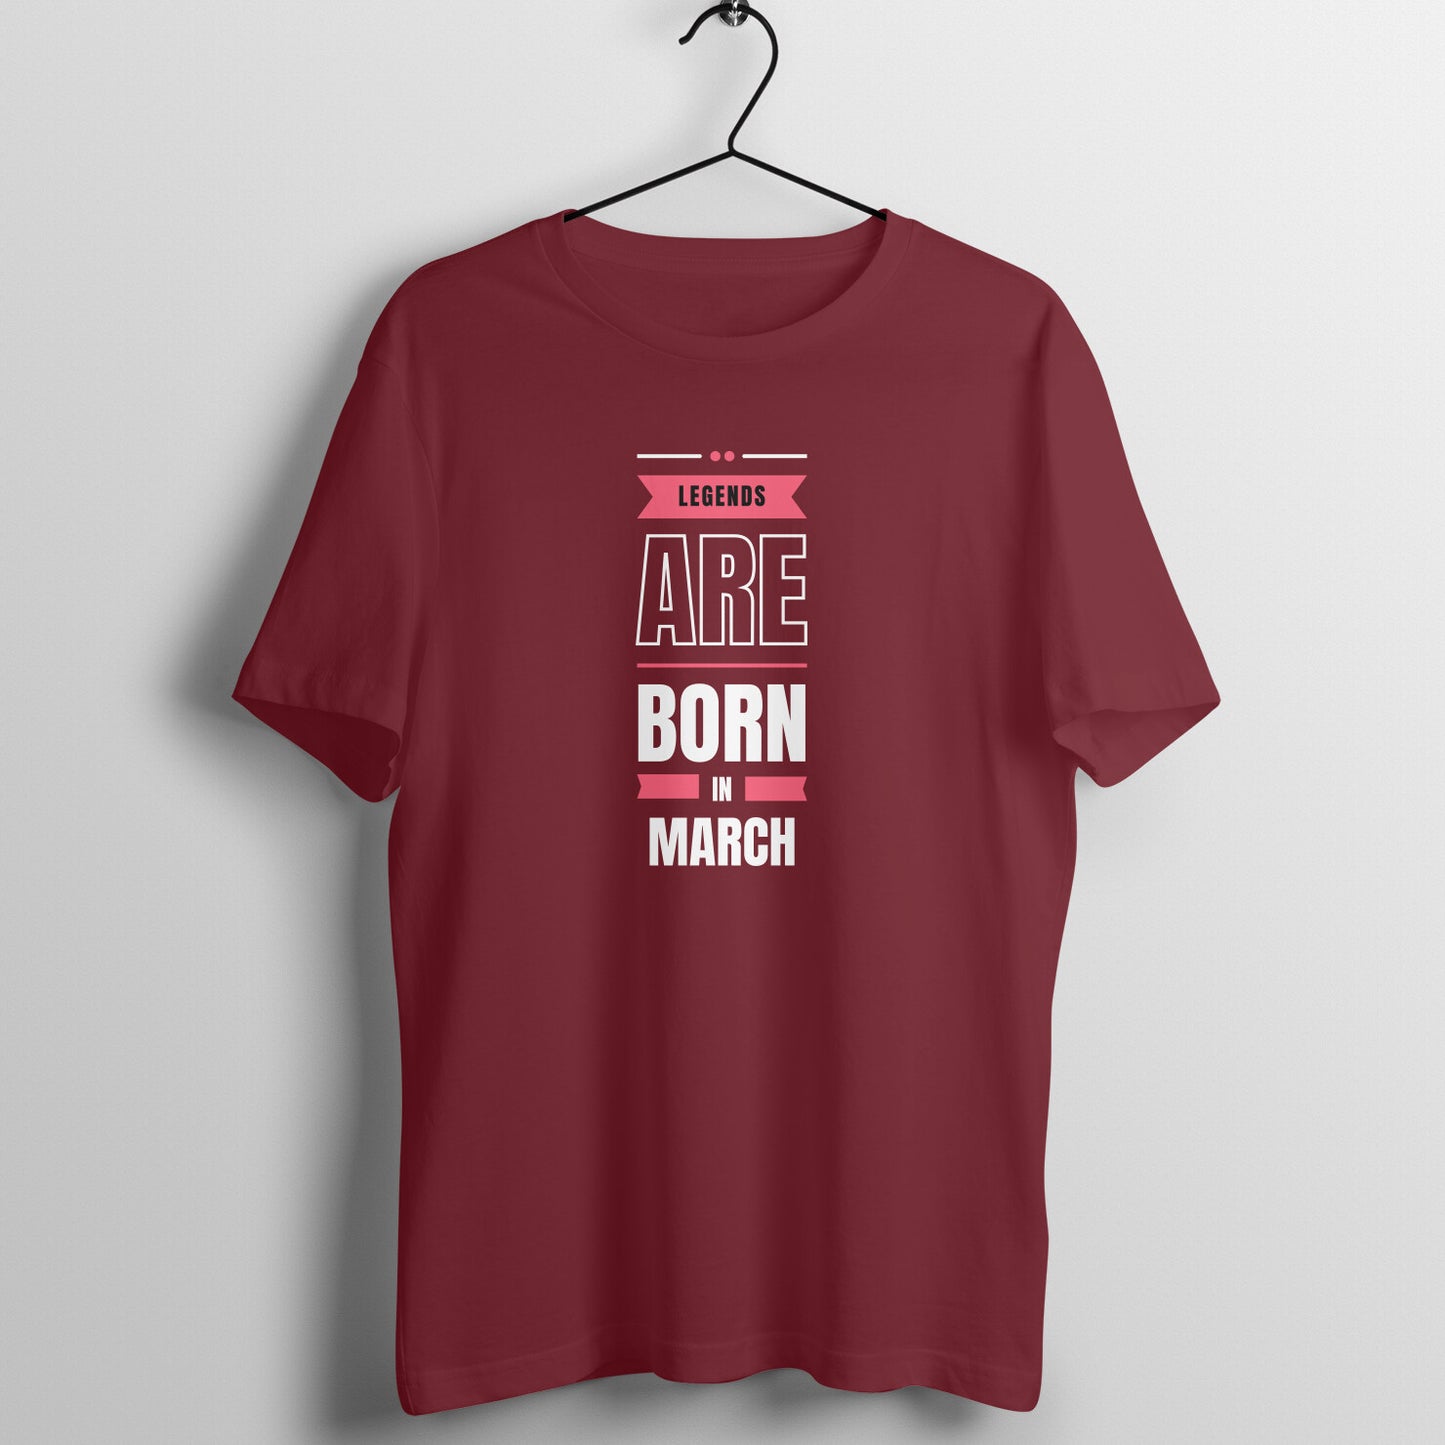 Legends are born in march - Birthday t shirt - Birthday gifts for your loved one